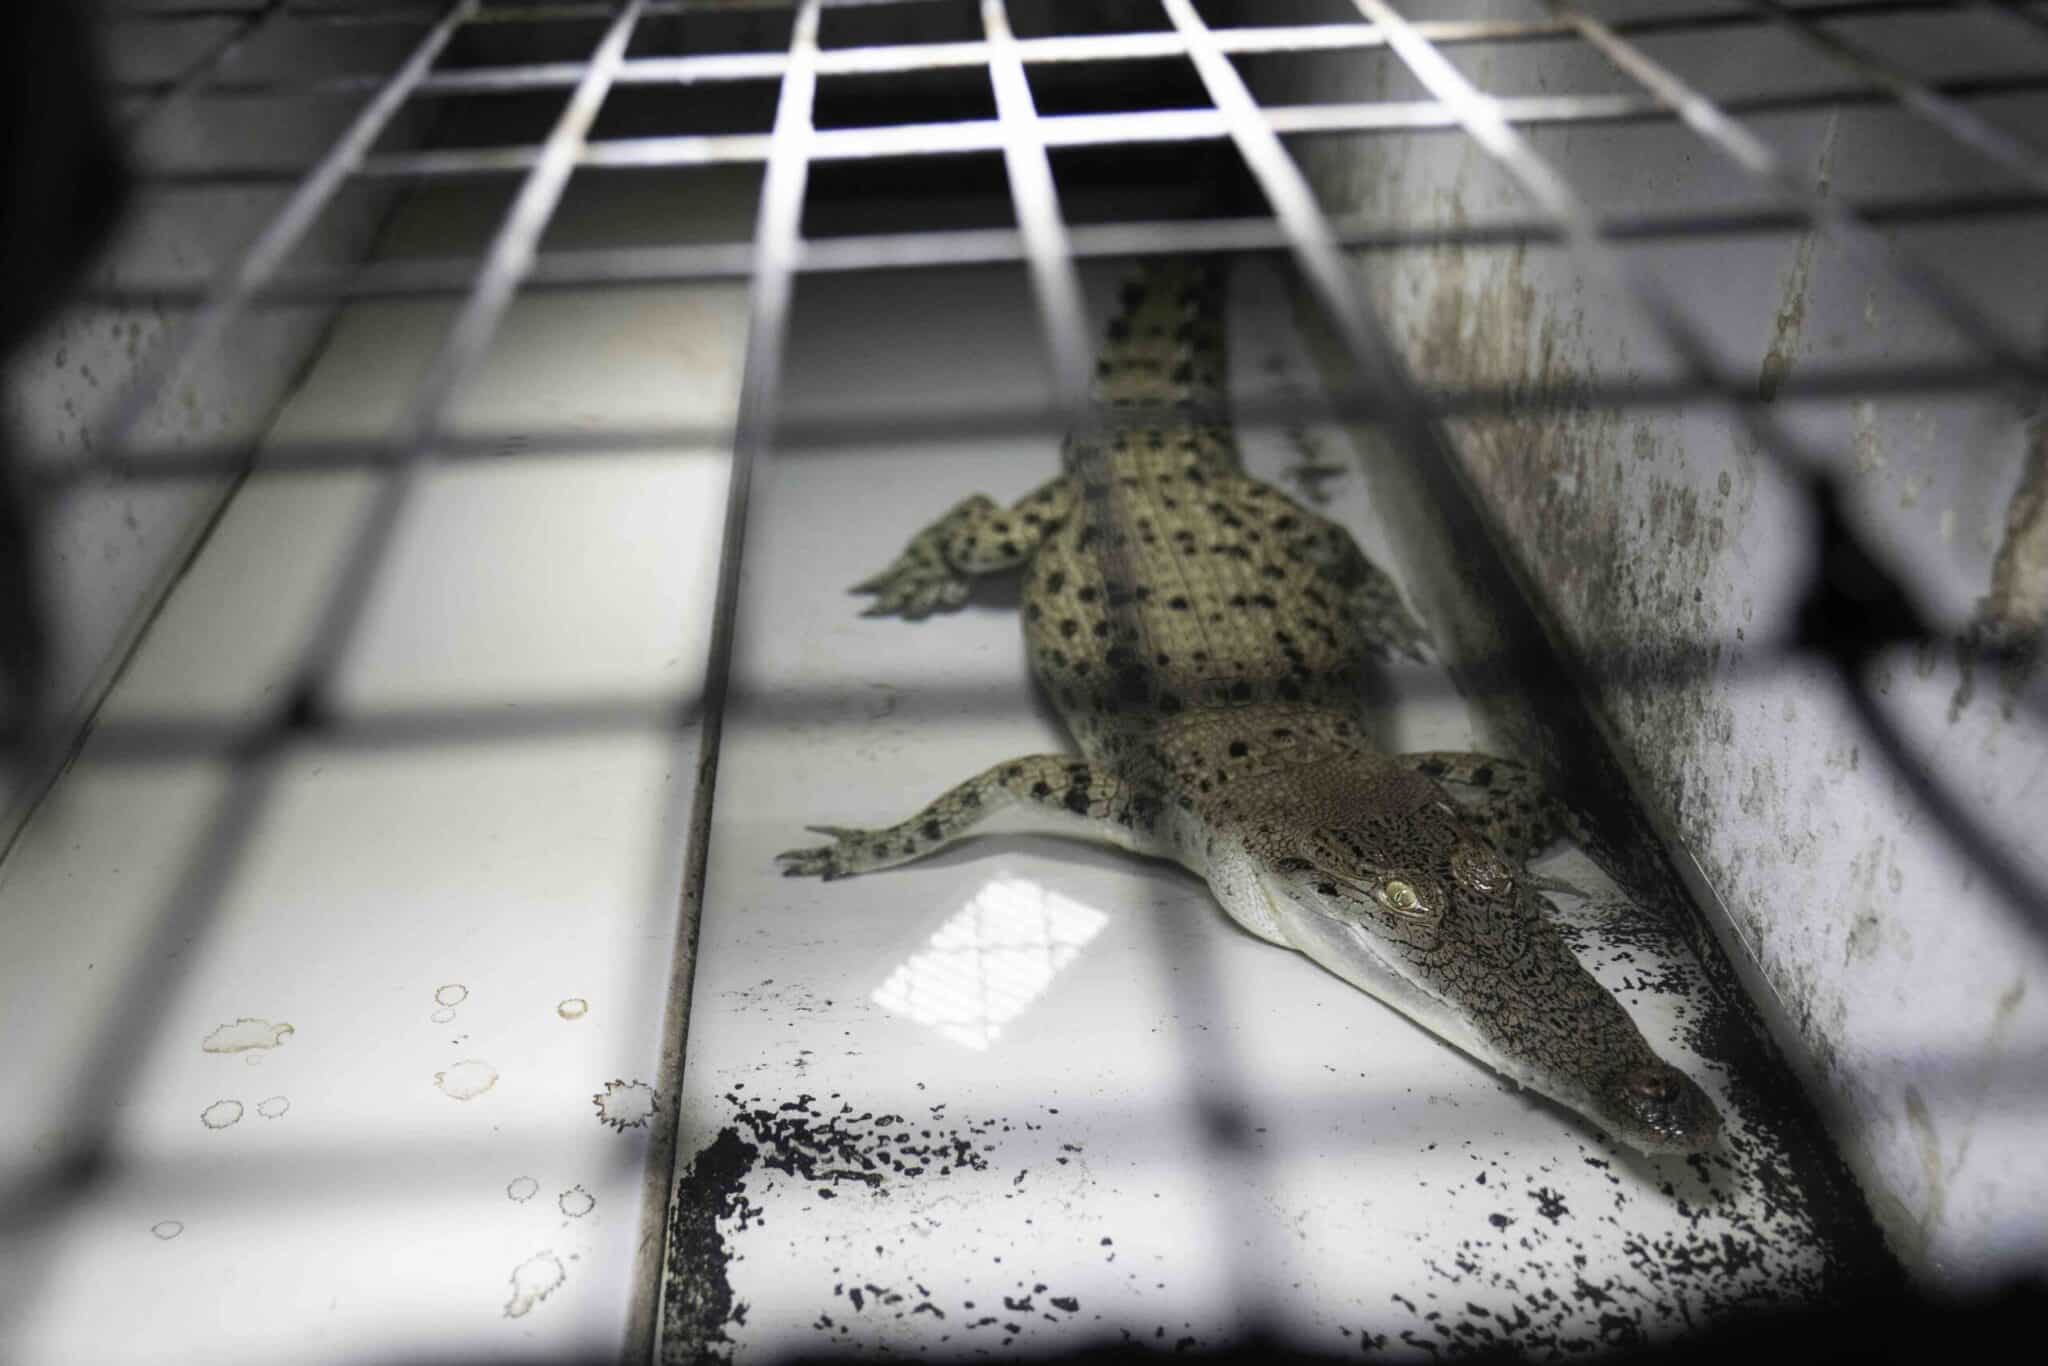 The suffering of crocodiles at leather farms for Hermes bags into exposed  in video